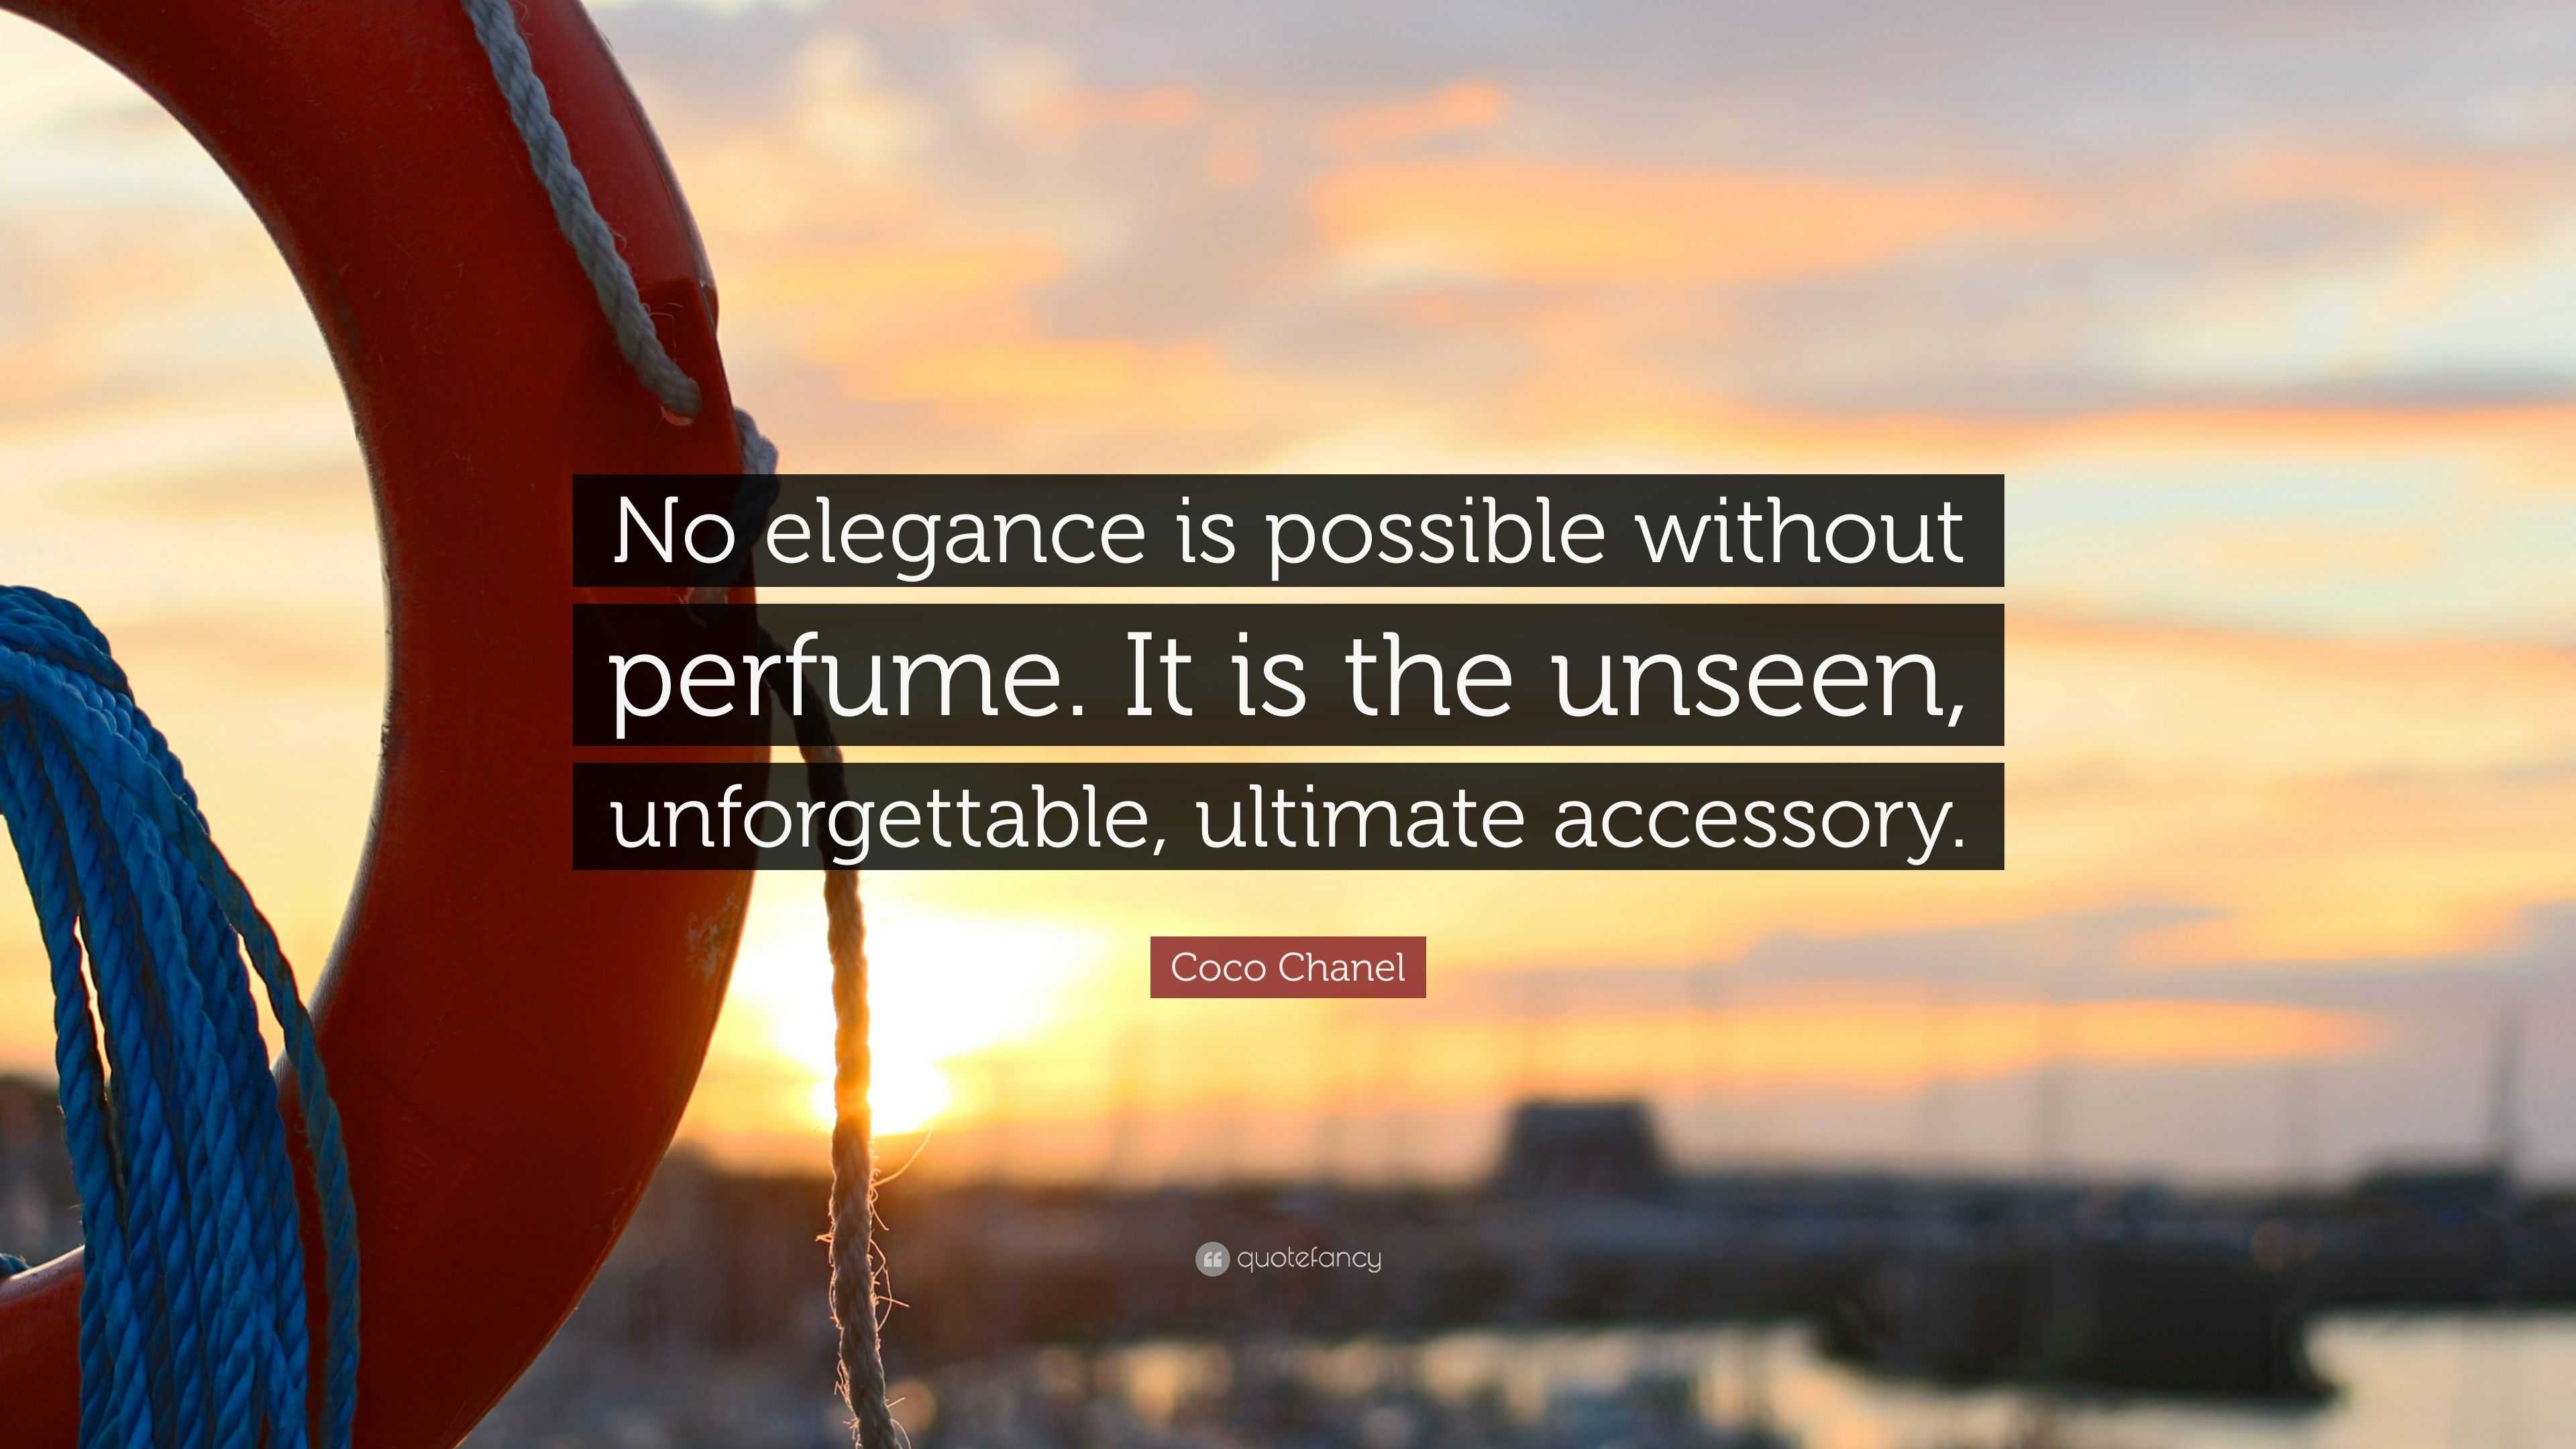 coco chanel quotes about perfume